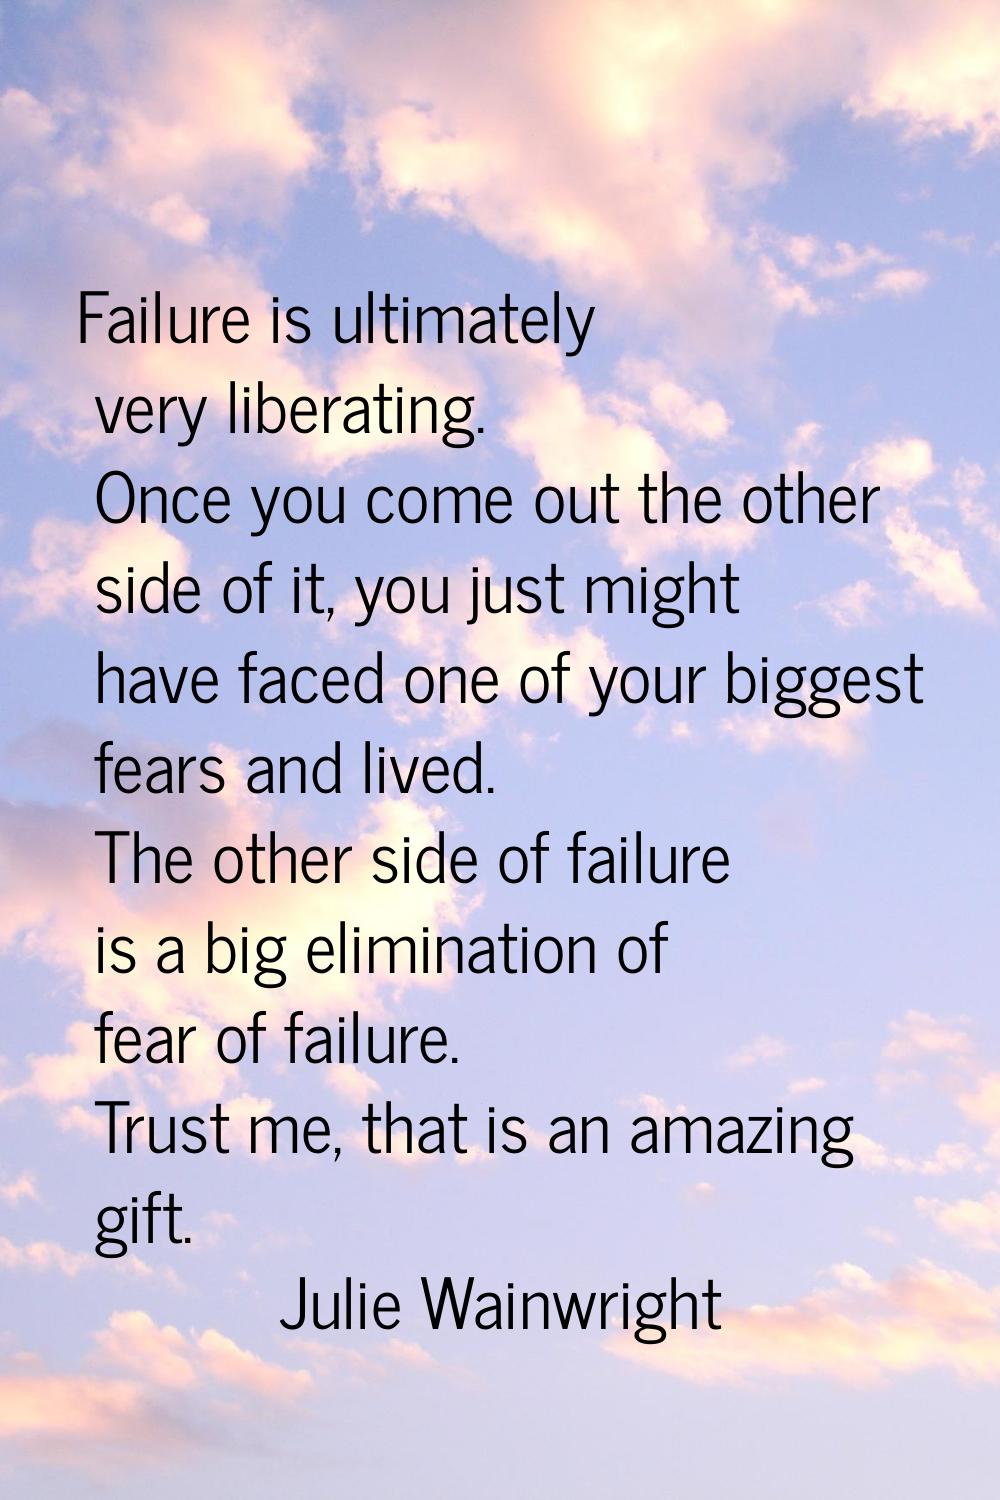 Failure is ultimately very liberating. Once you come out the other side of it, you just might have 